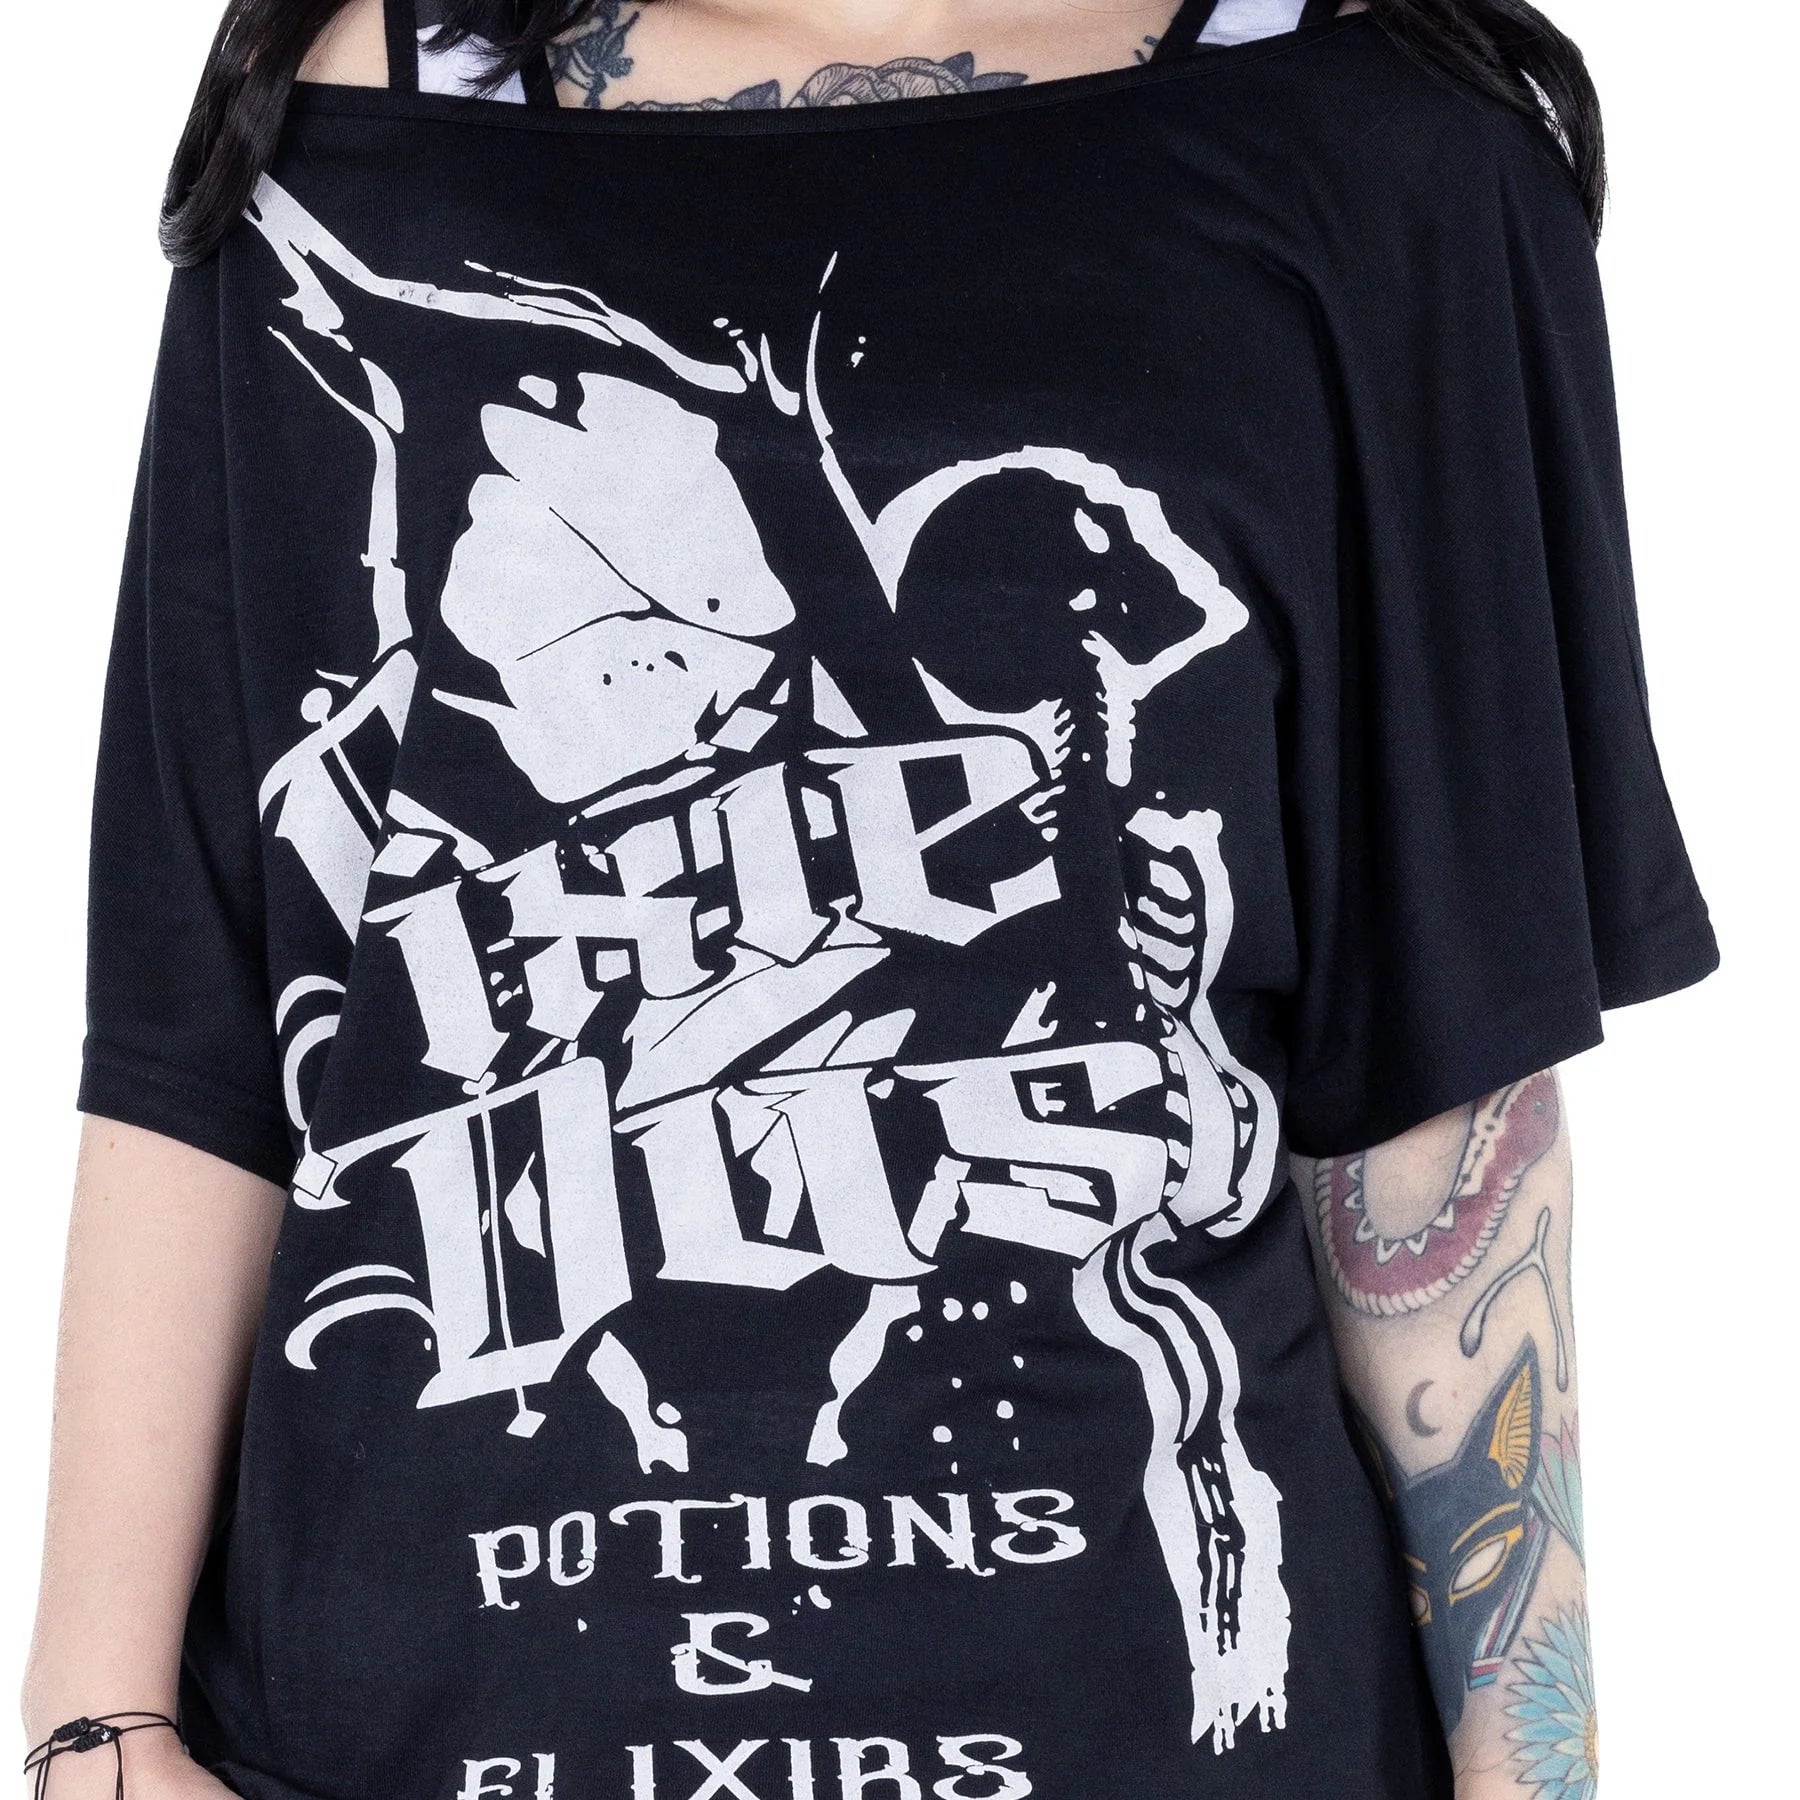 PIXIE POTIONS TWIN TOP Heartless Colours Shop Hamburg